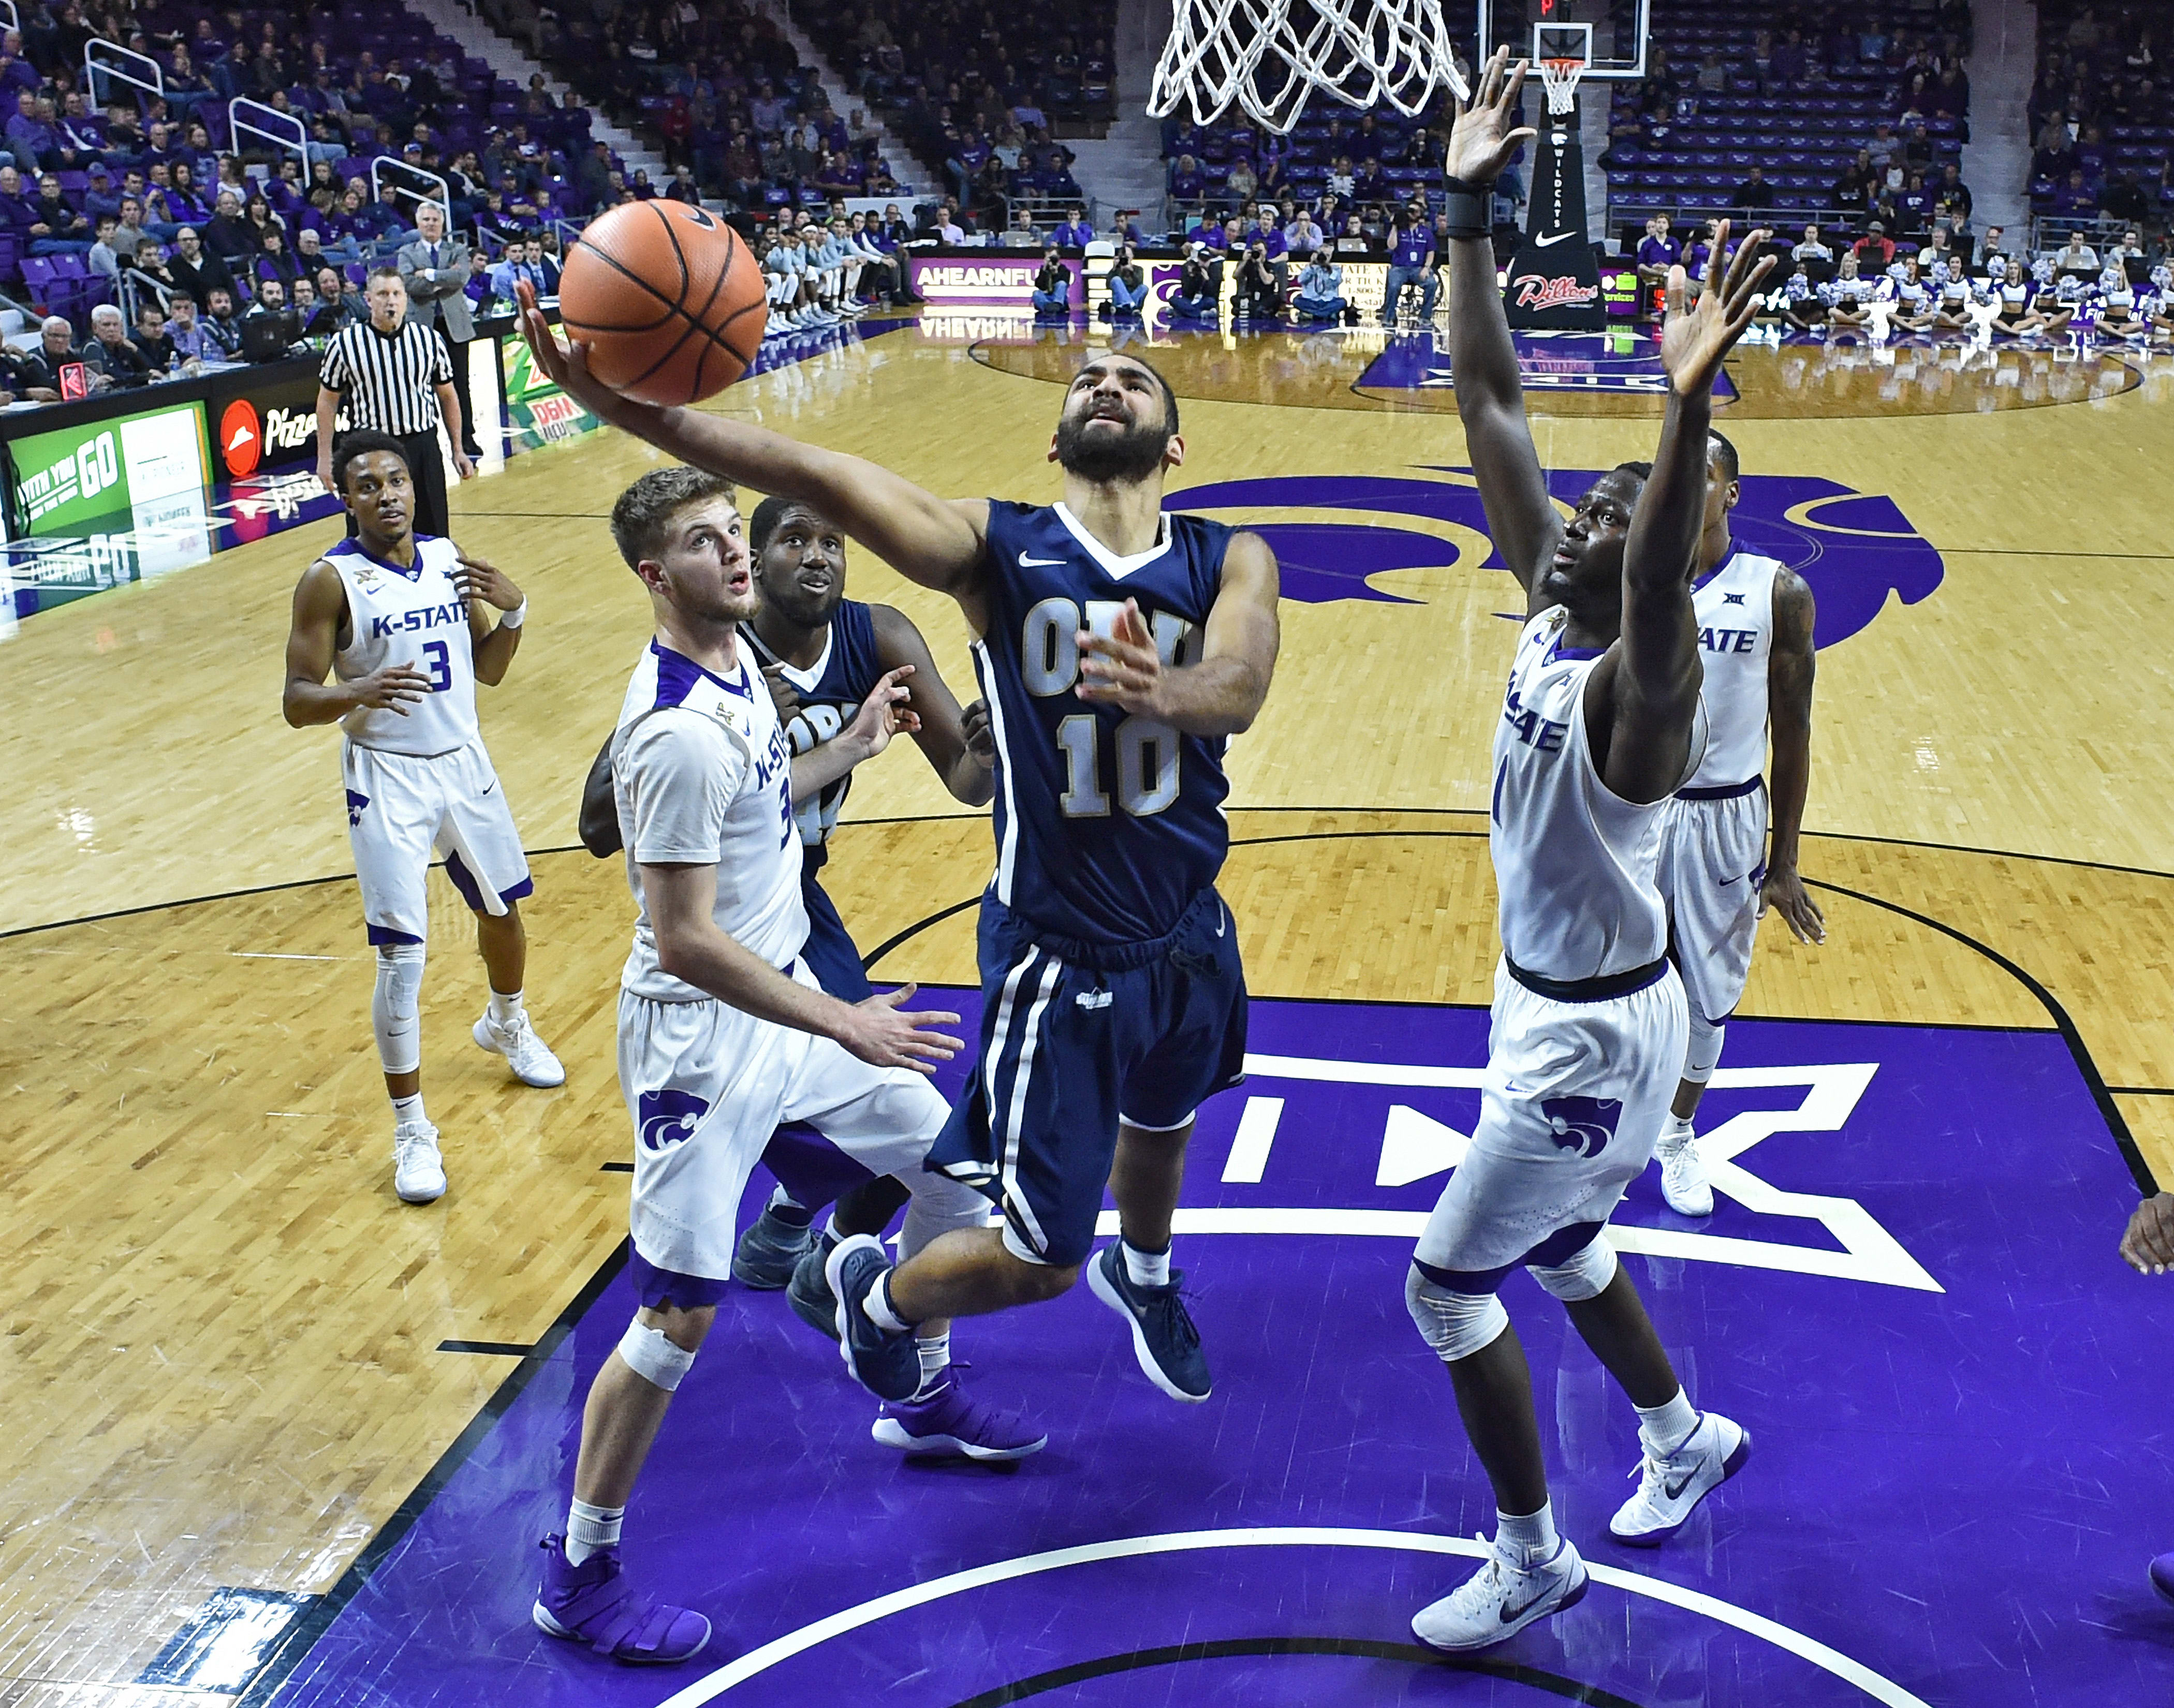 K-State Basketball: State of the Union for hoops program - Page 3